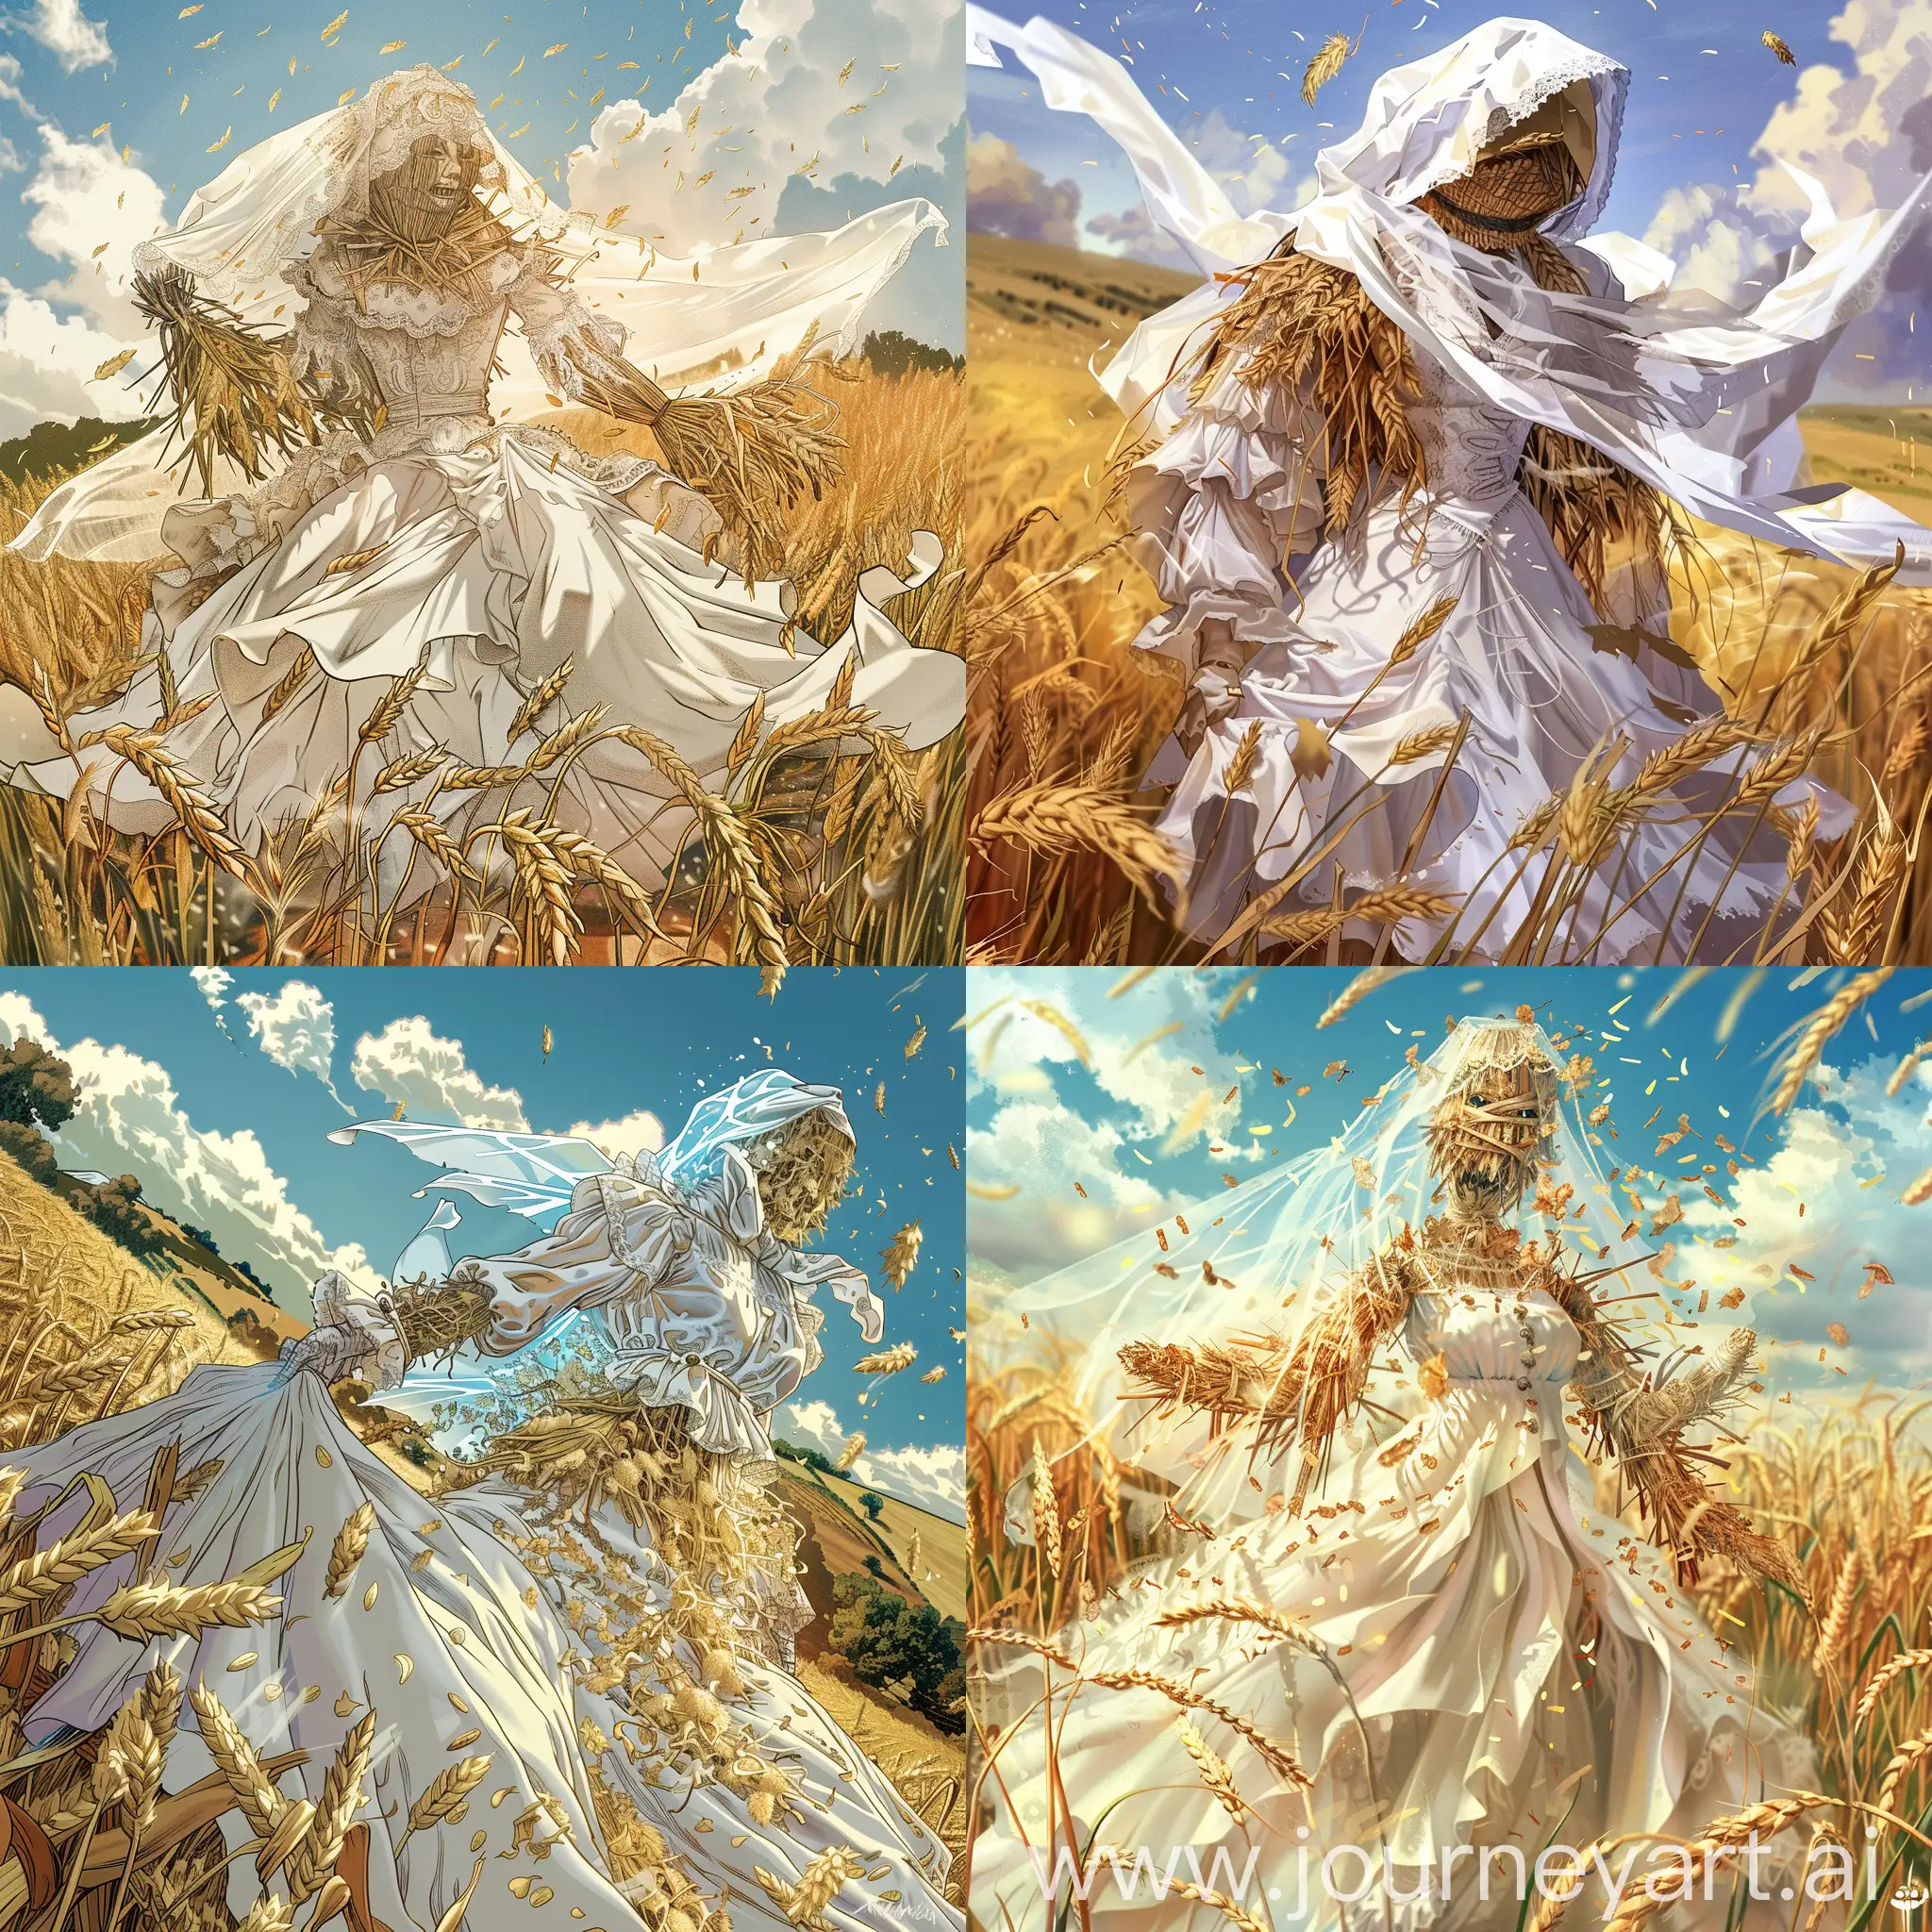 an story named "the straw bride". a art with a female scarecrow wearing a white wedding dress, surrounded by a wheat field, a scarecrow, digital art, comic book